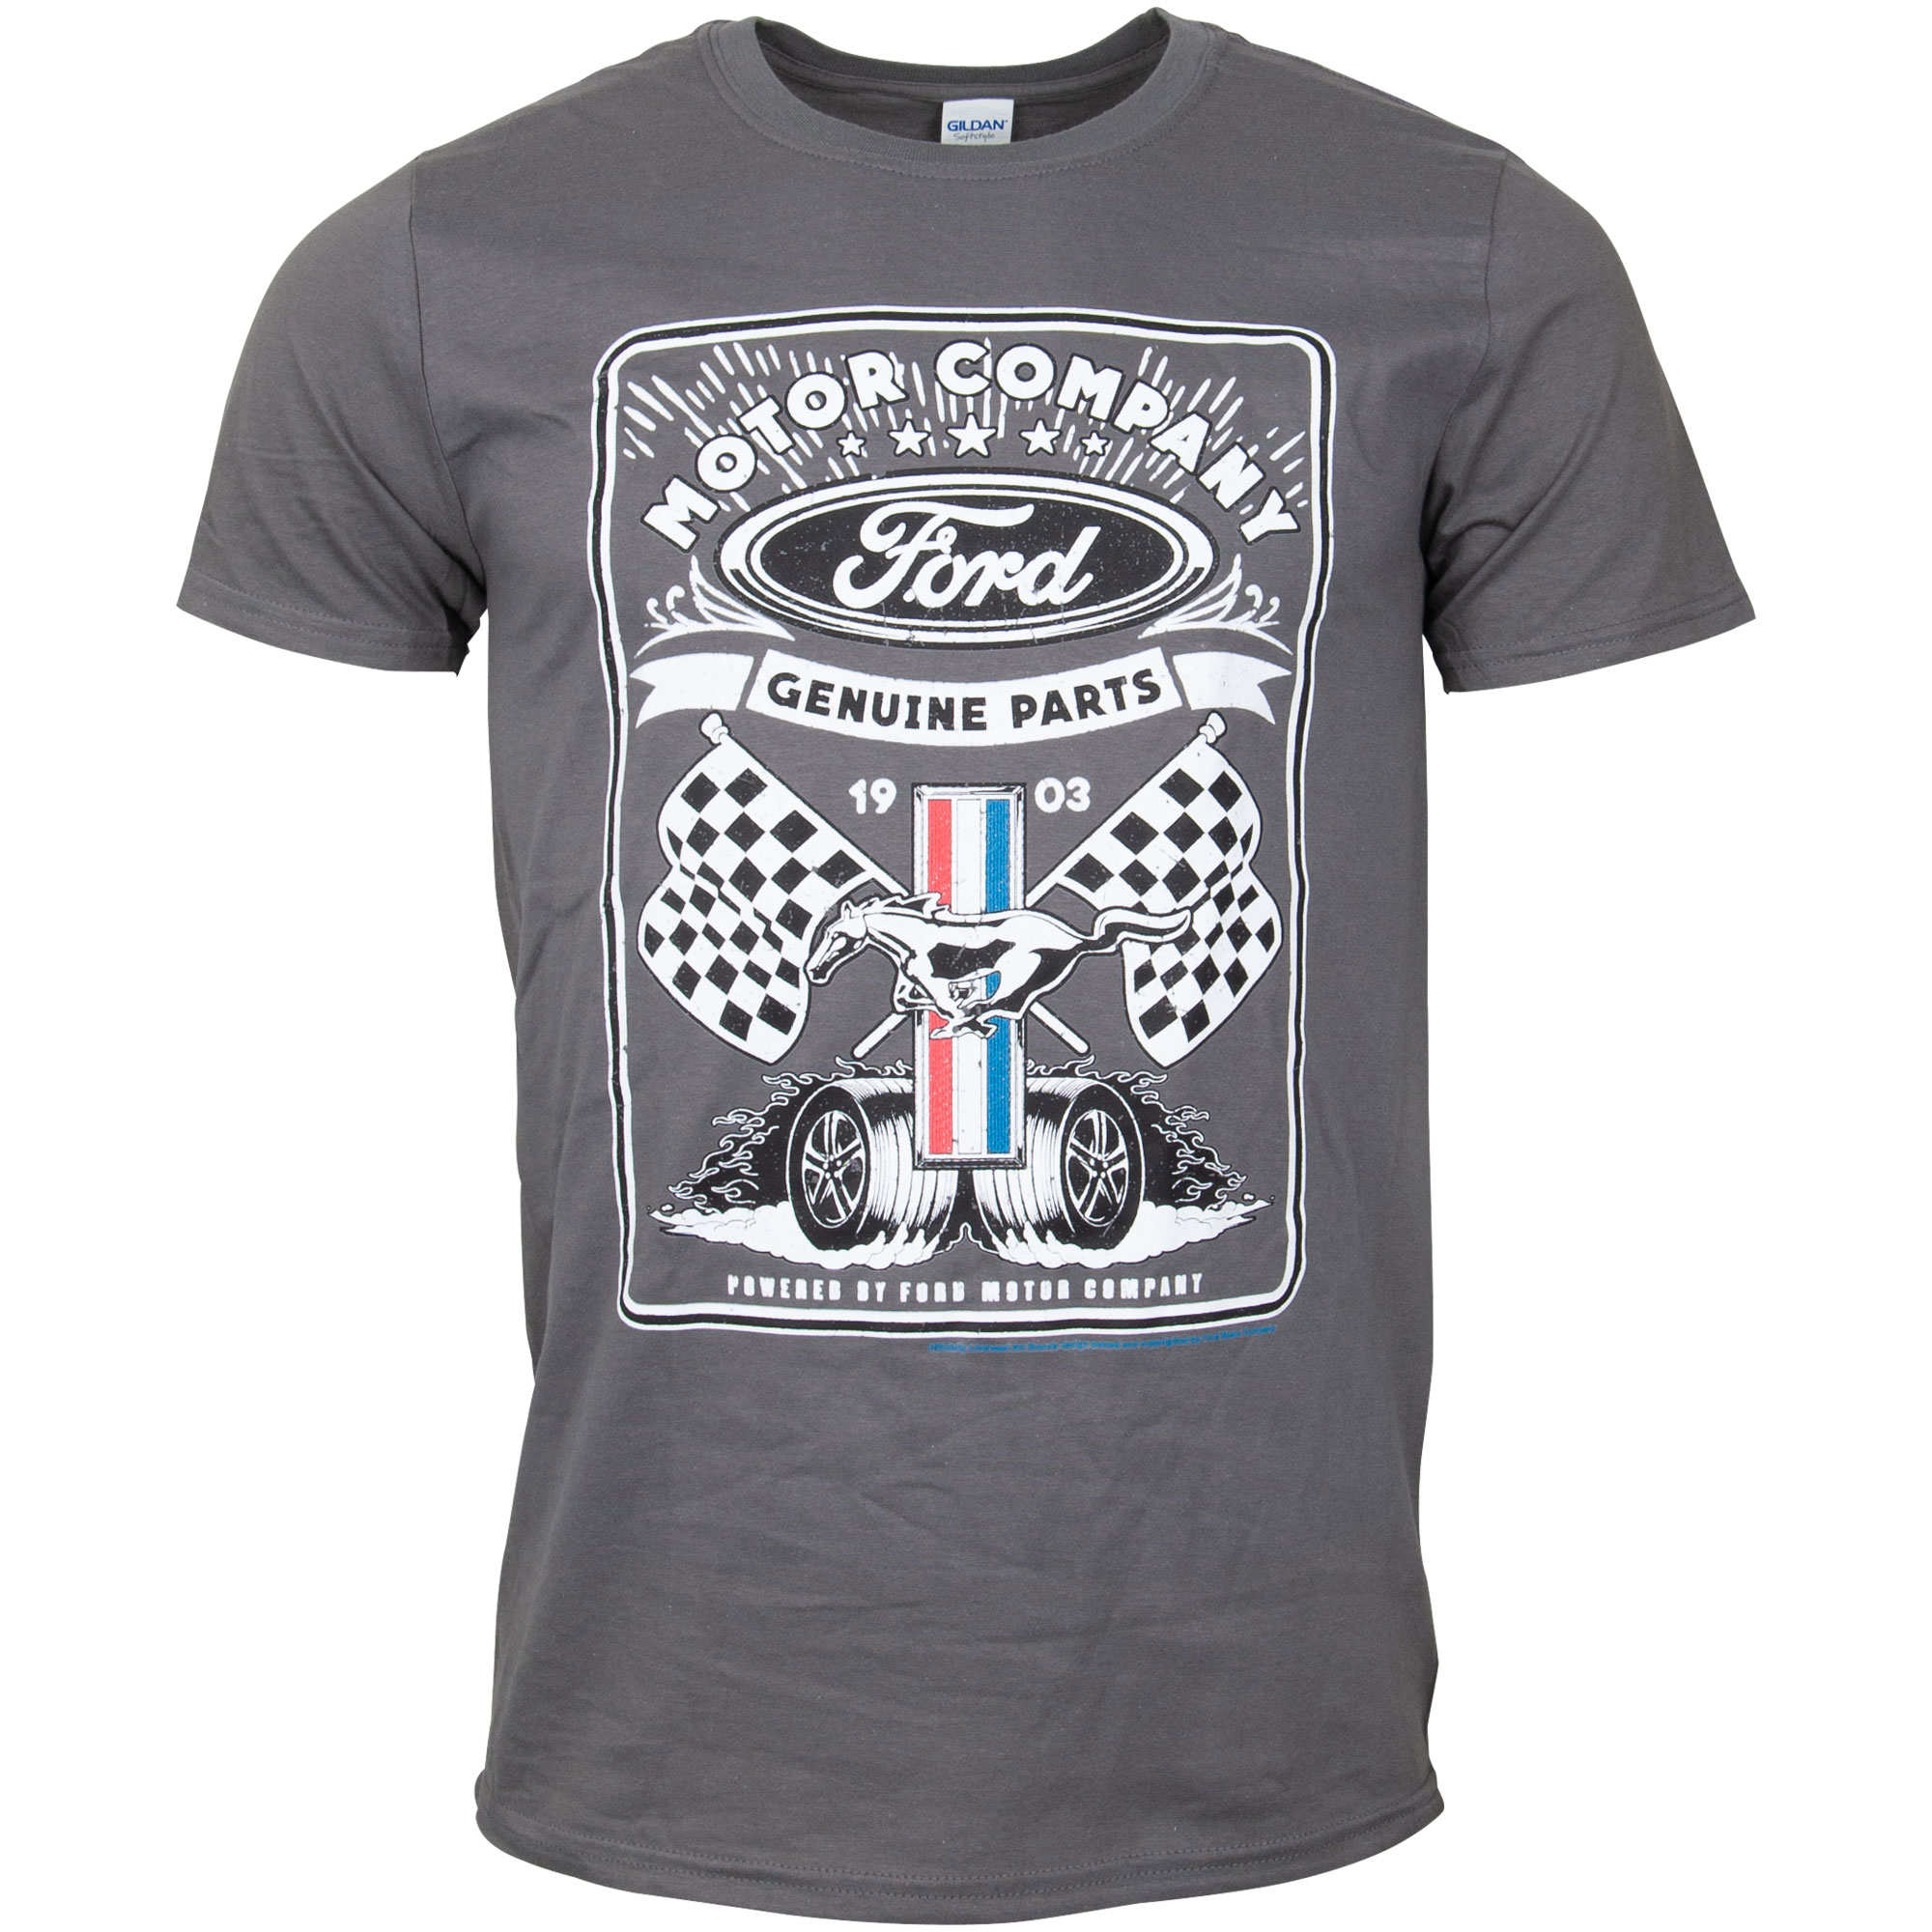 Ford t-shirt "Genuine Parts" - grey